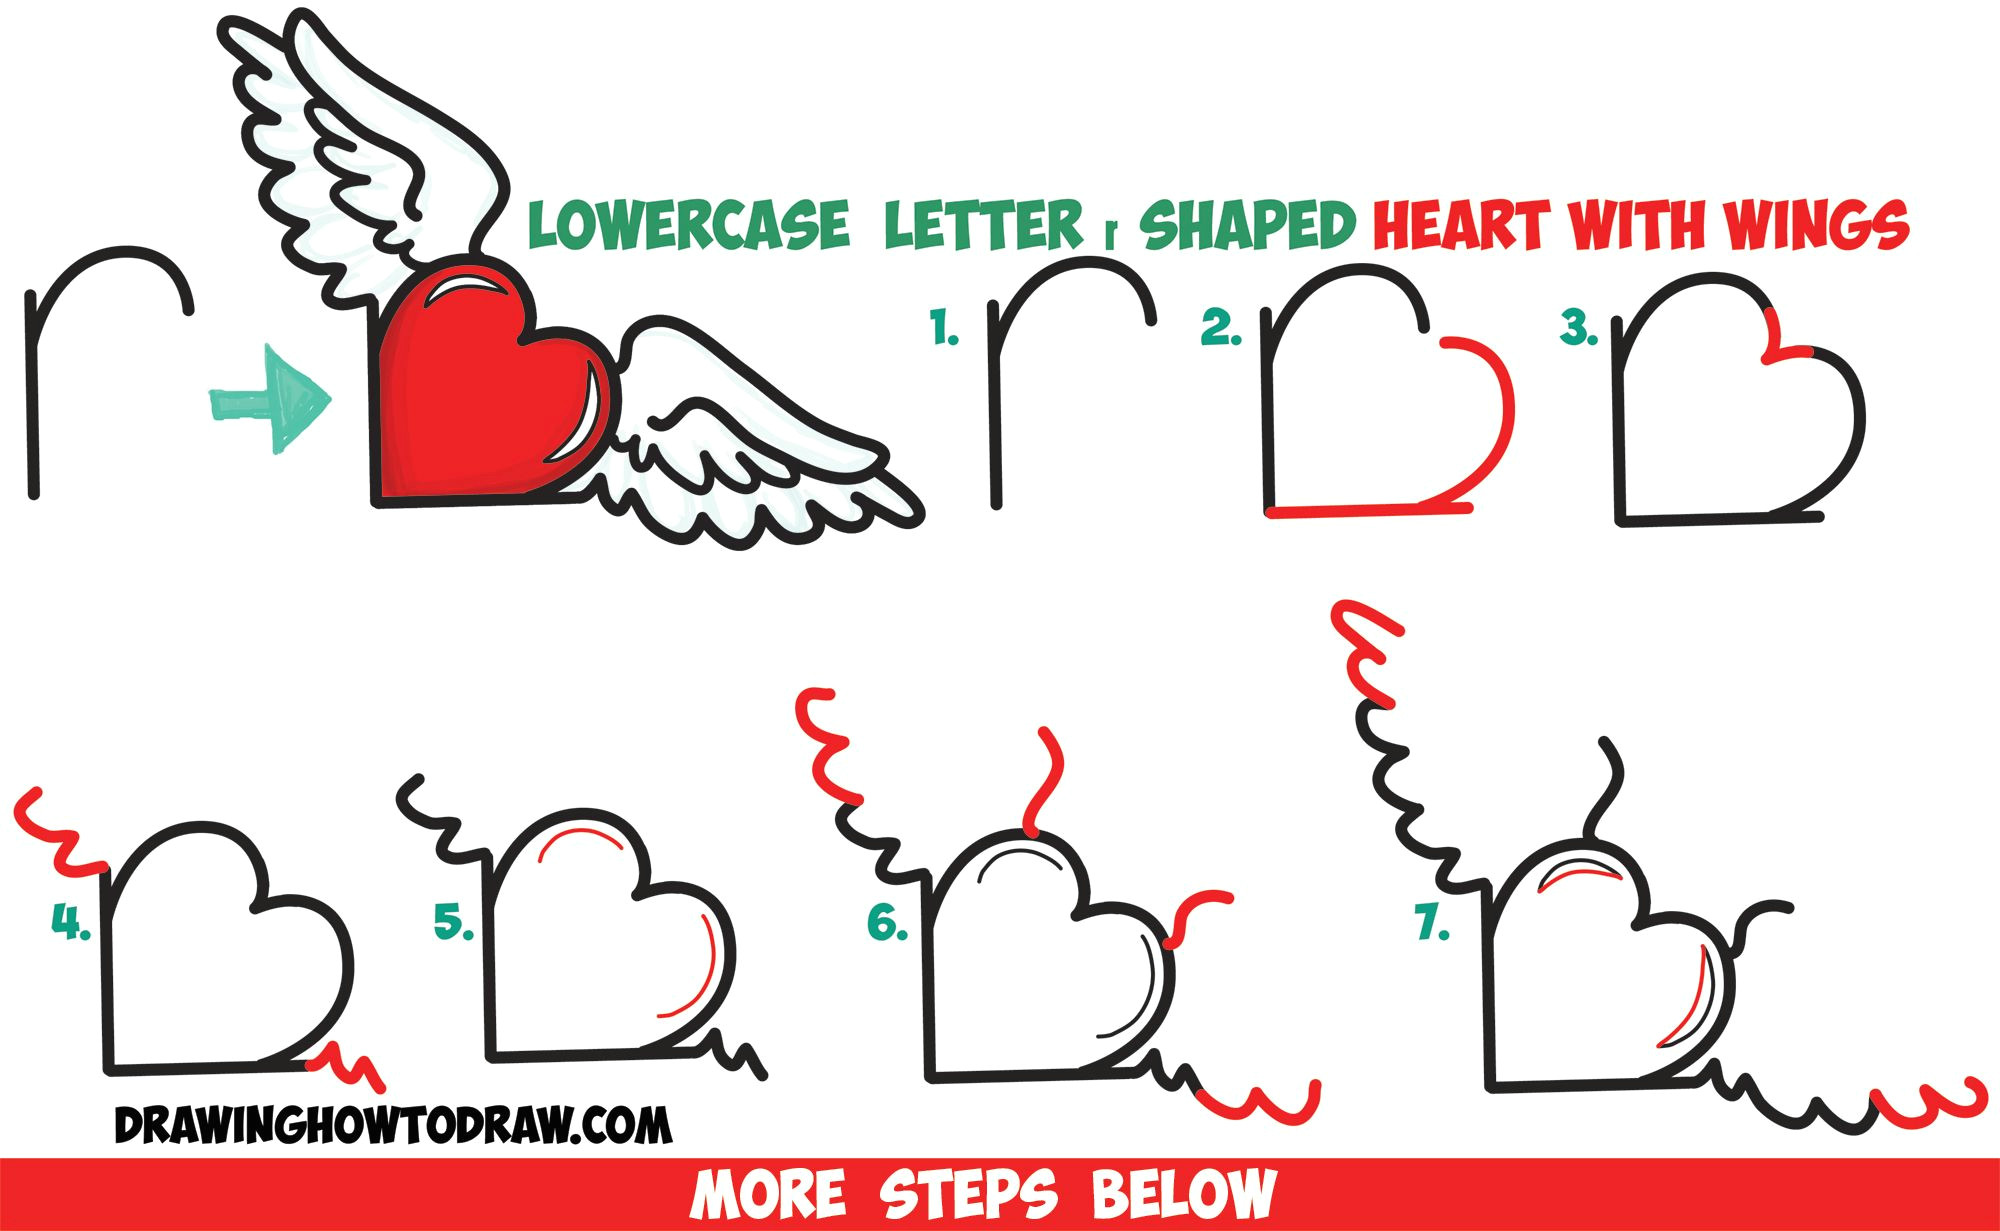 Drawing Of A Heart with Parts How to Draw Heart with Wings From Lowercase Letter R Shapes Easy